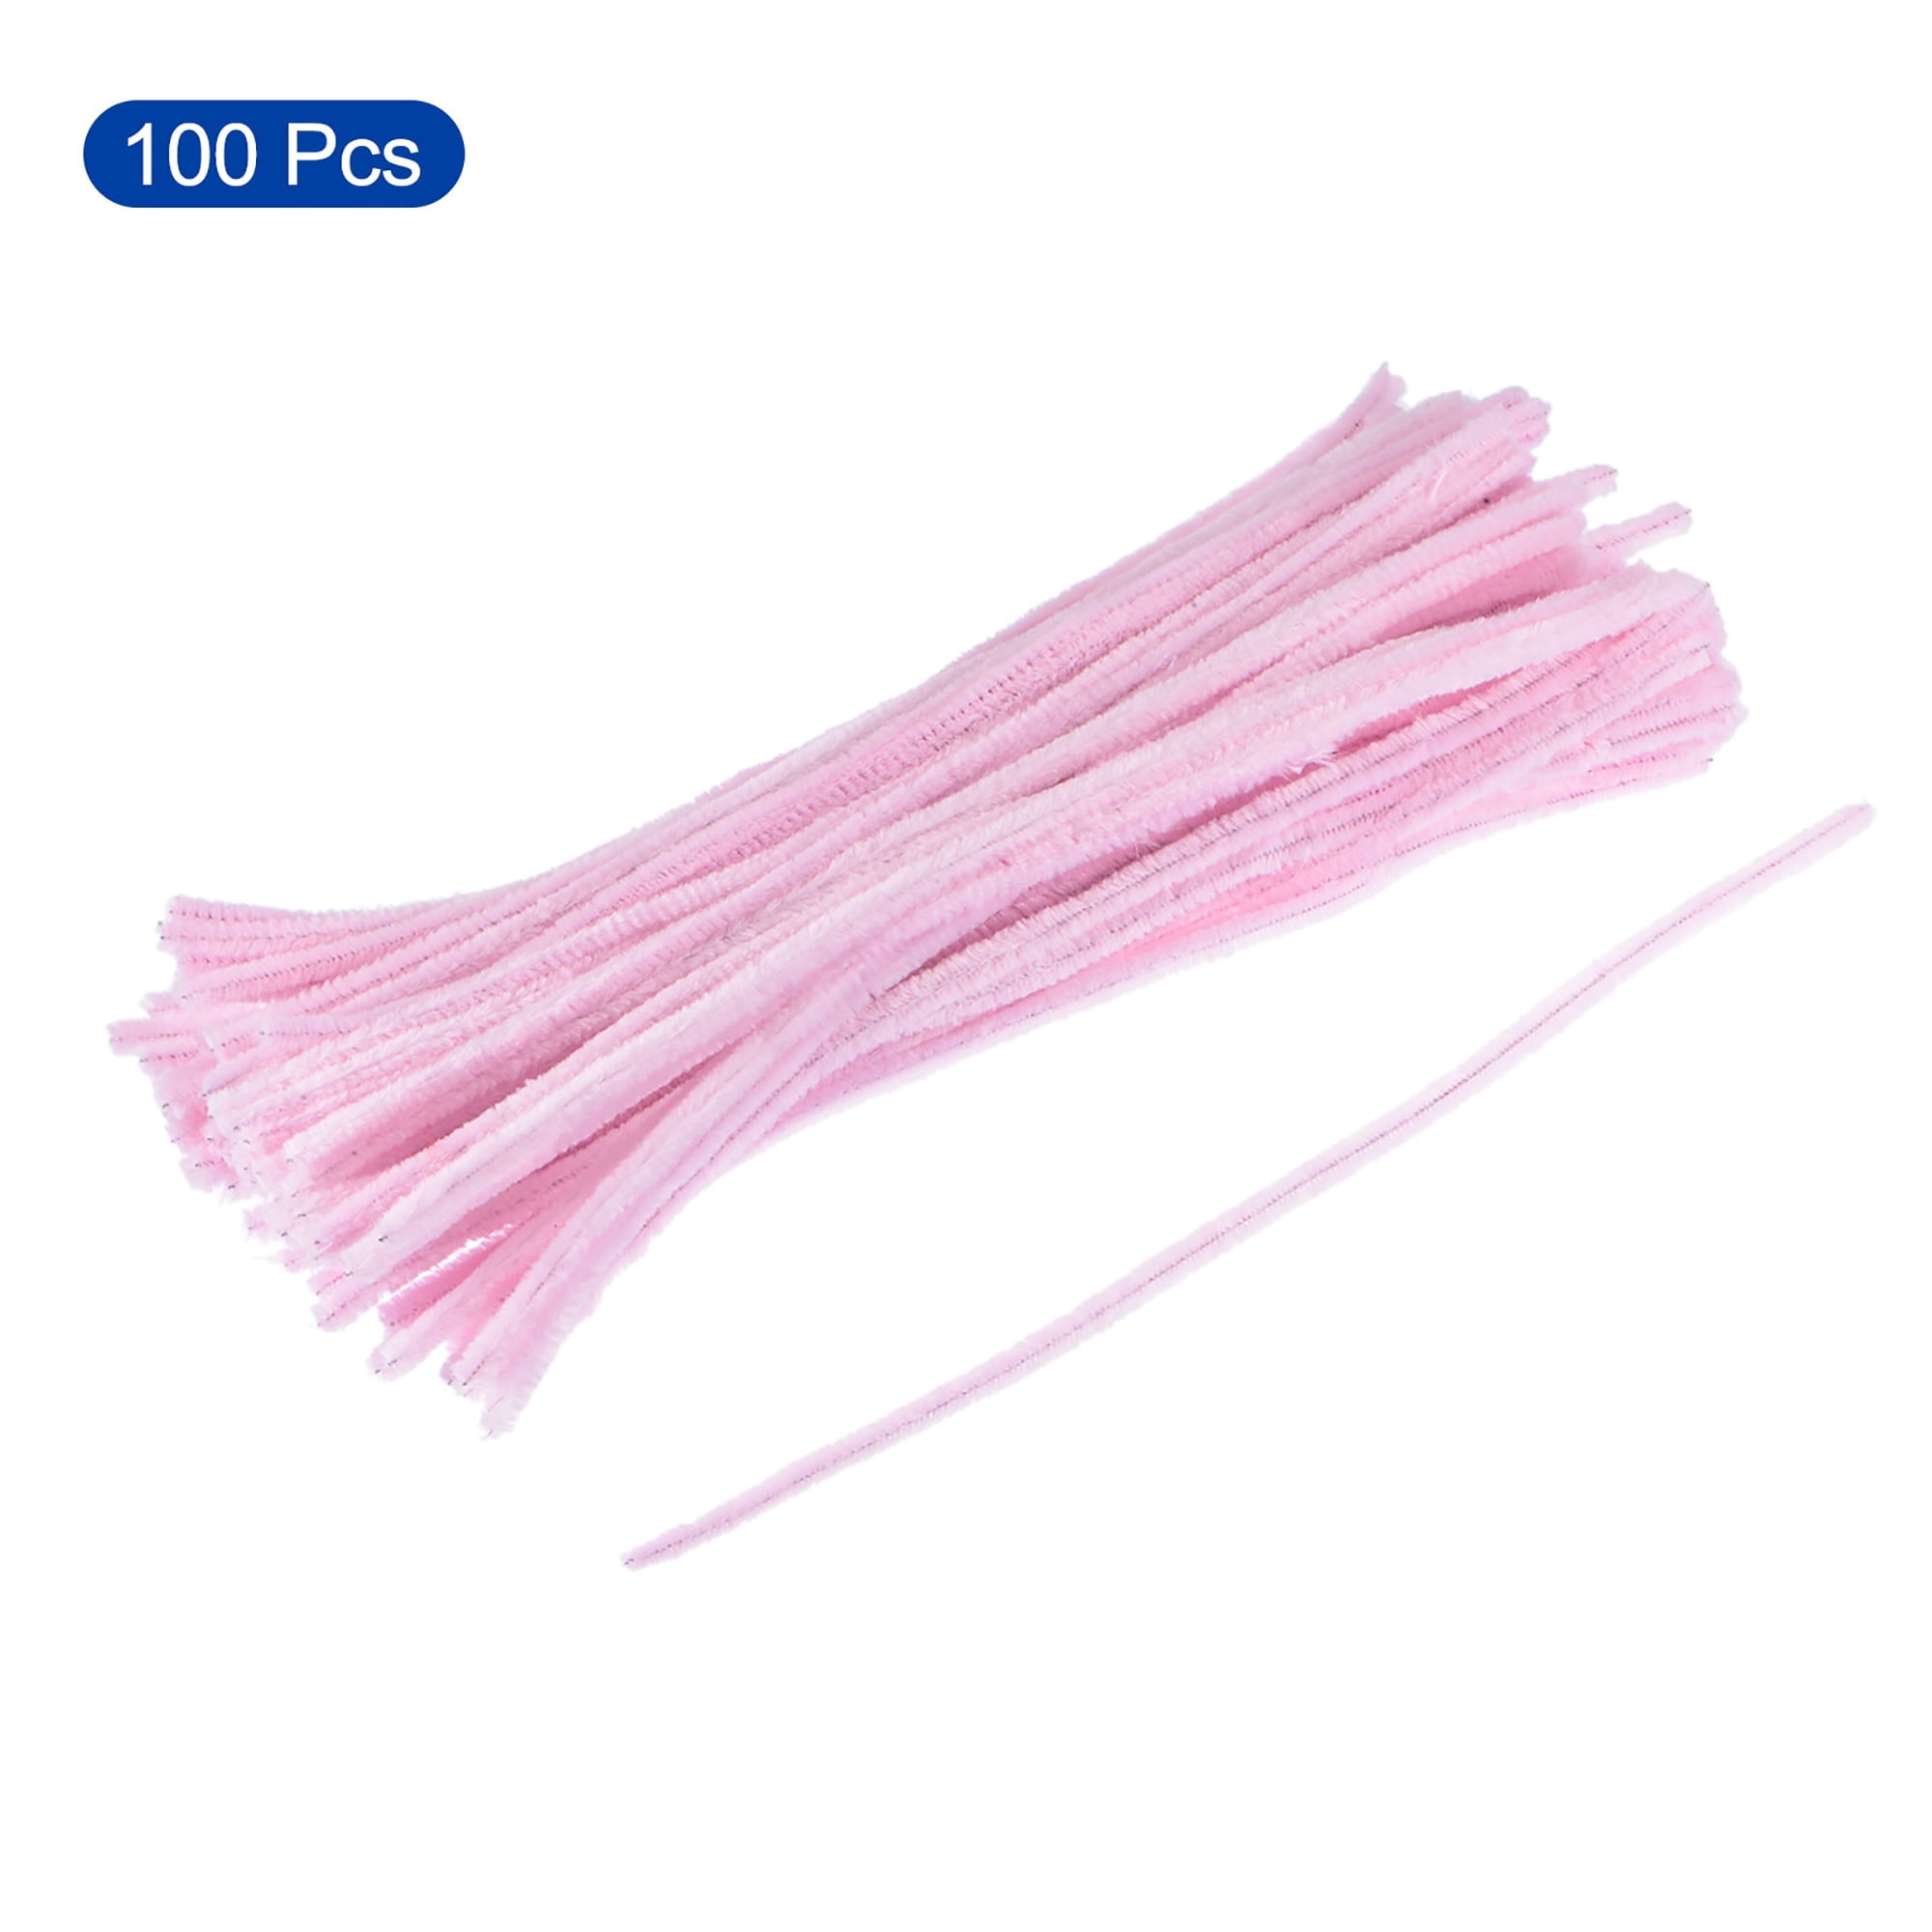 Caydo 200 Pieces Pink Pipe Cleaners Craft Chenille Stems for Valentine's  Day Gift, DIY Art Creative Crafts Projects Decoration(6 mm x 12 Inch)